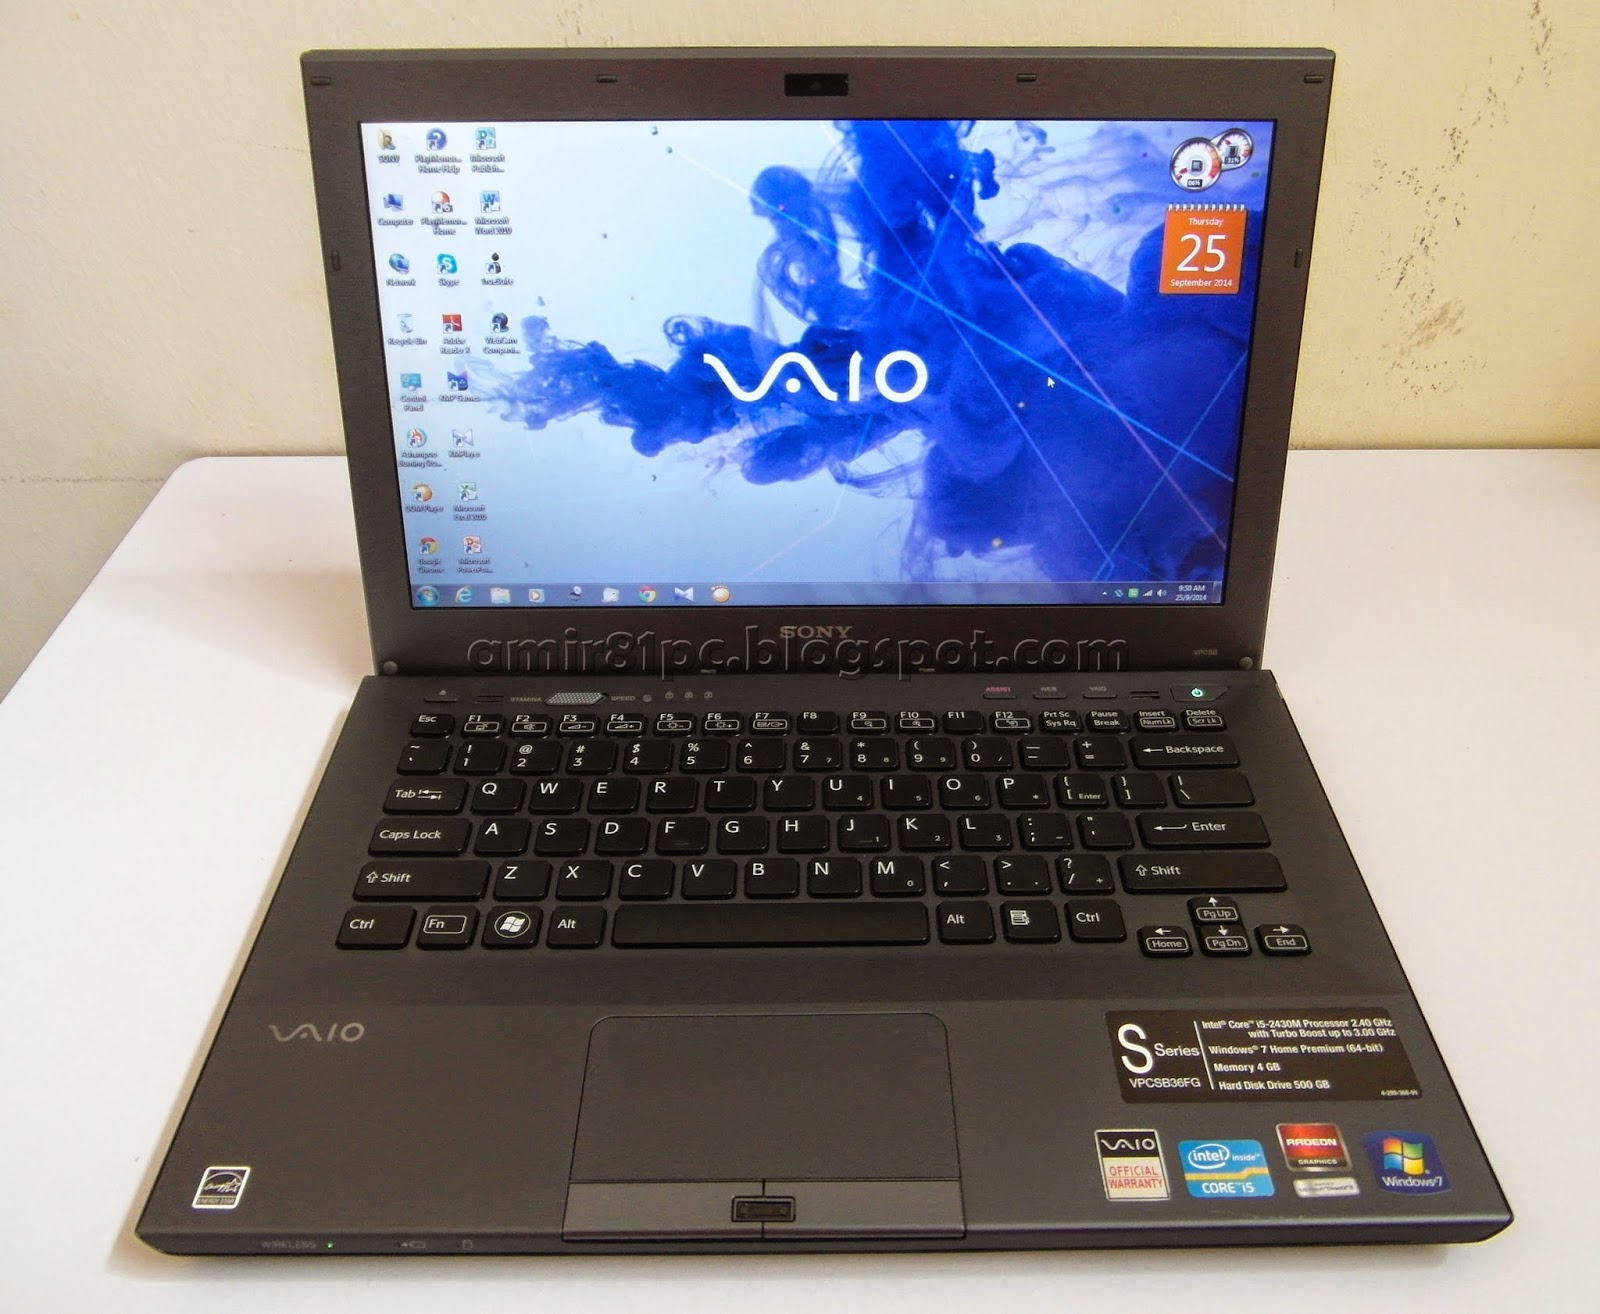 Three A Tech Computer Sales and Services: Used Laptop Sony Vaio S